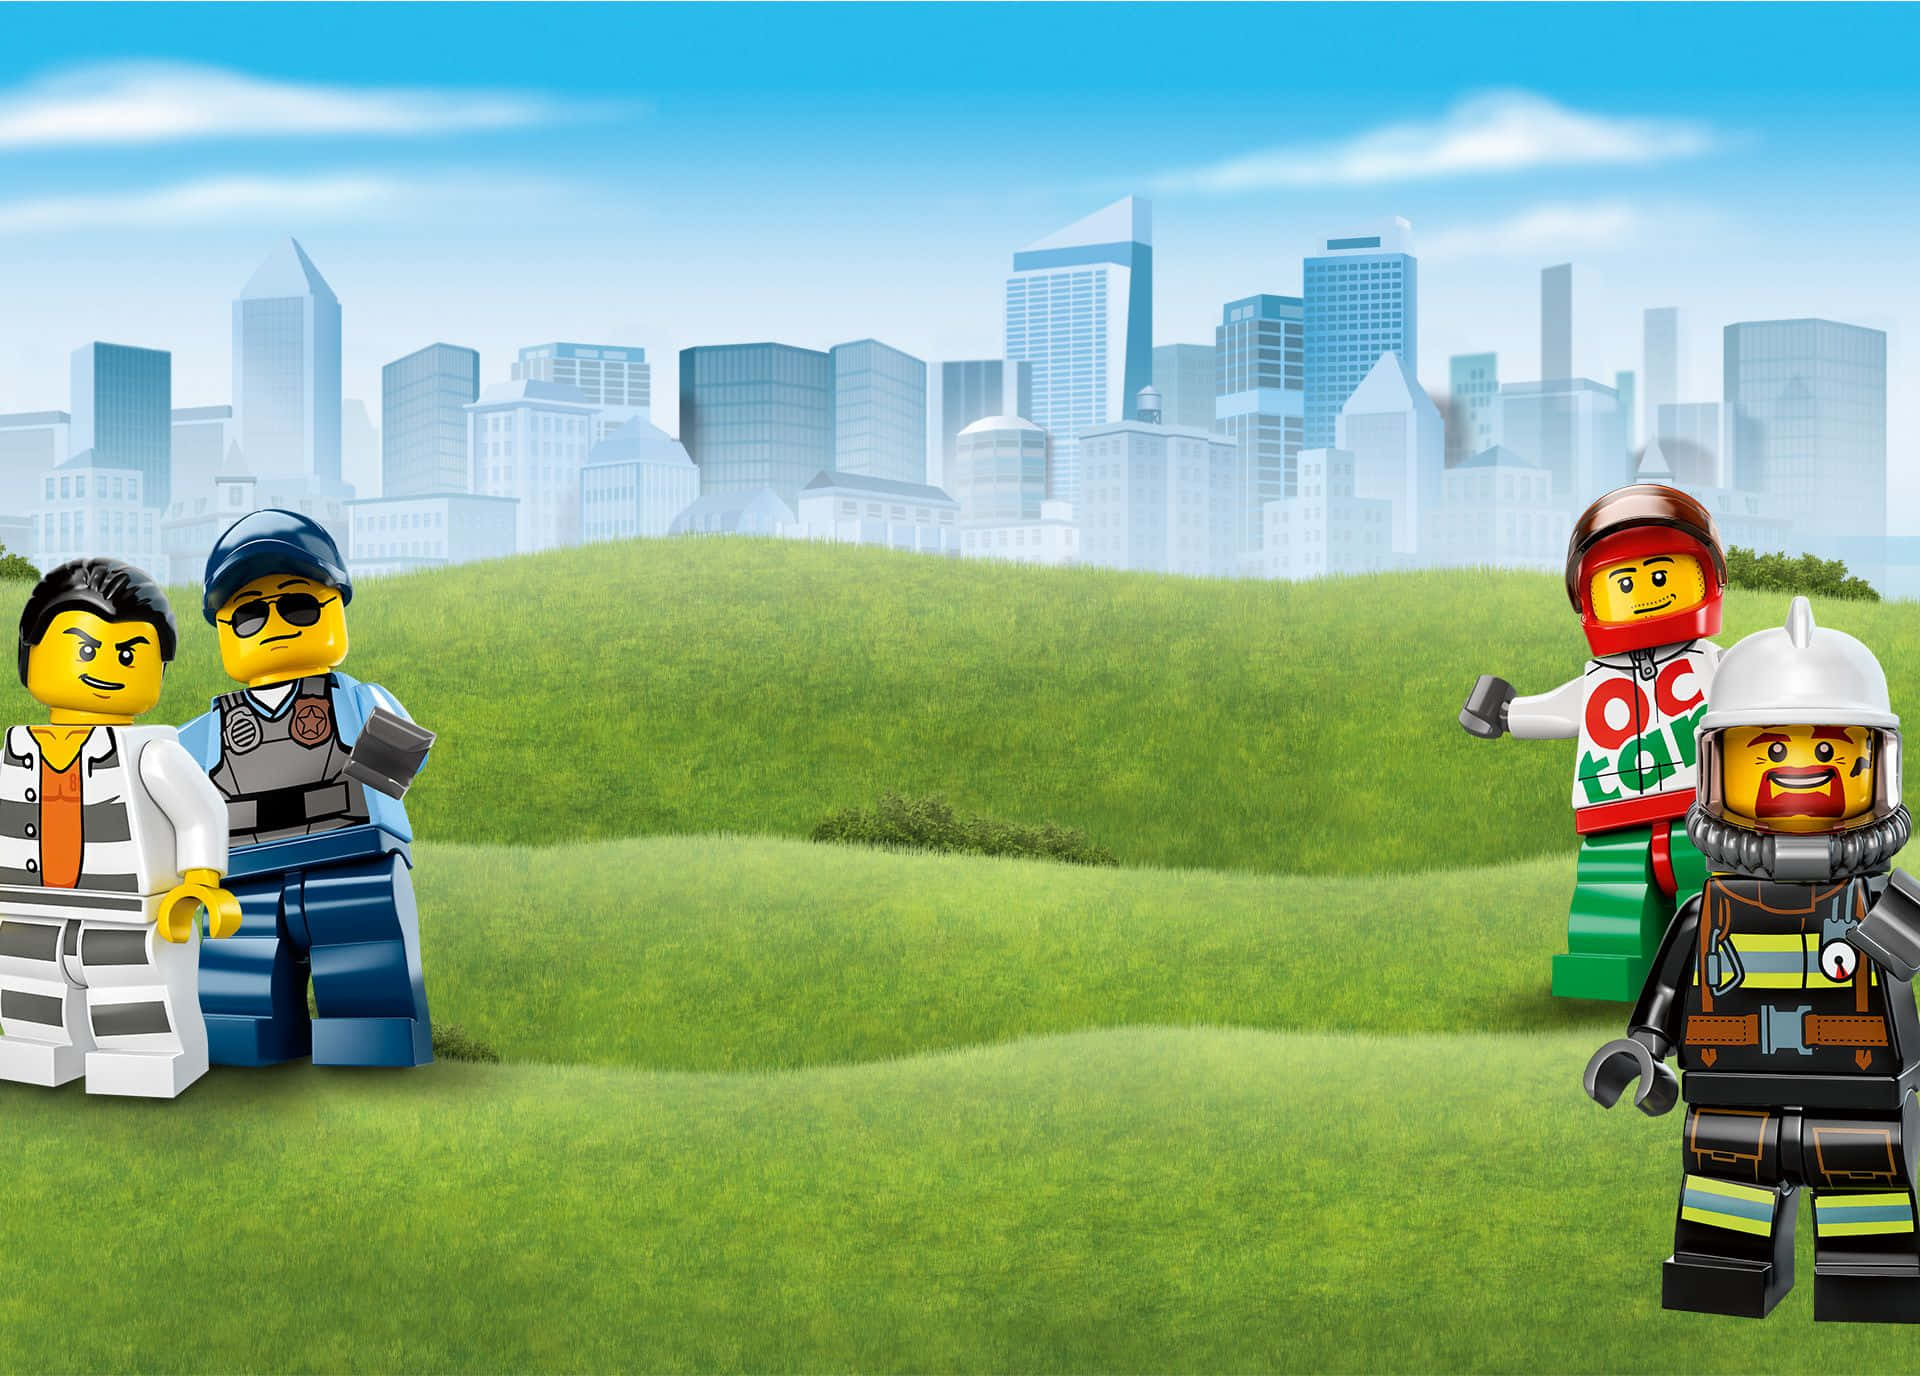 Start your own adventure with LEGO